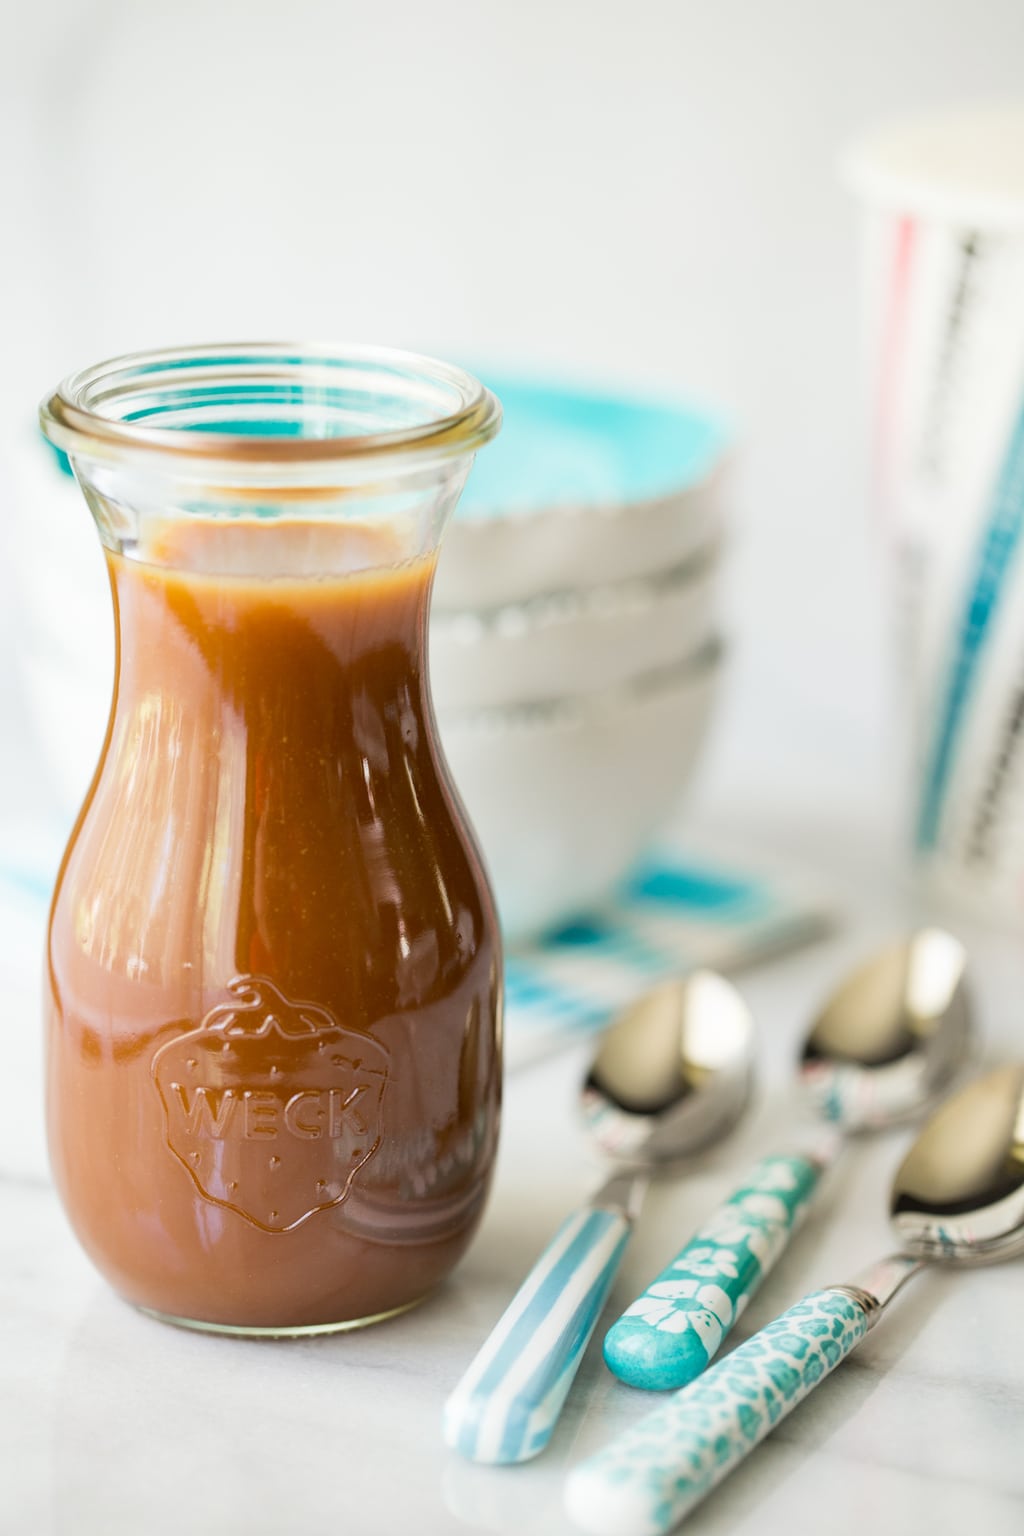 Vertical picture of caramel sauce in a glass jar with small bowls and spoons in the background